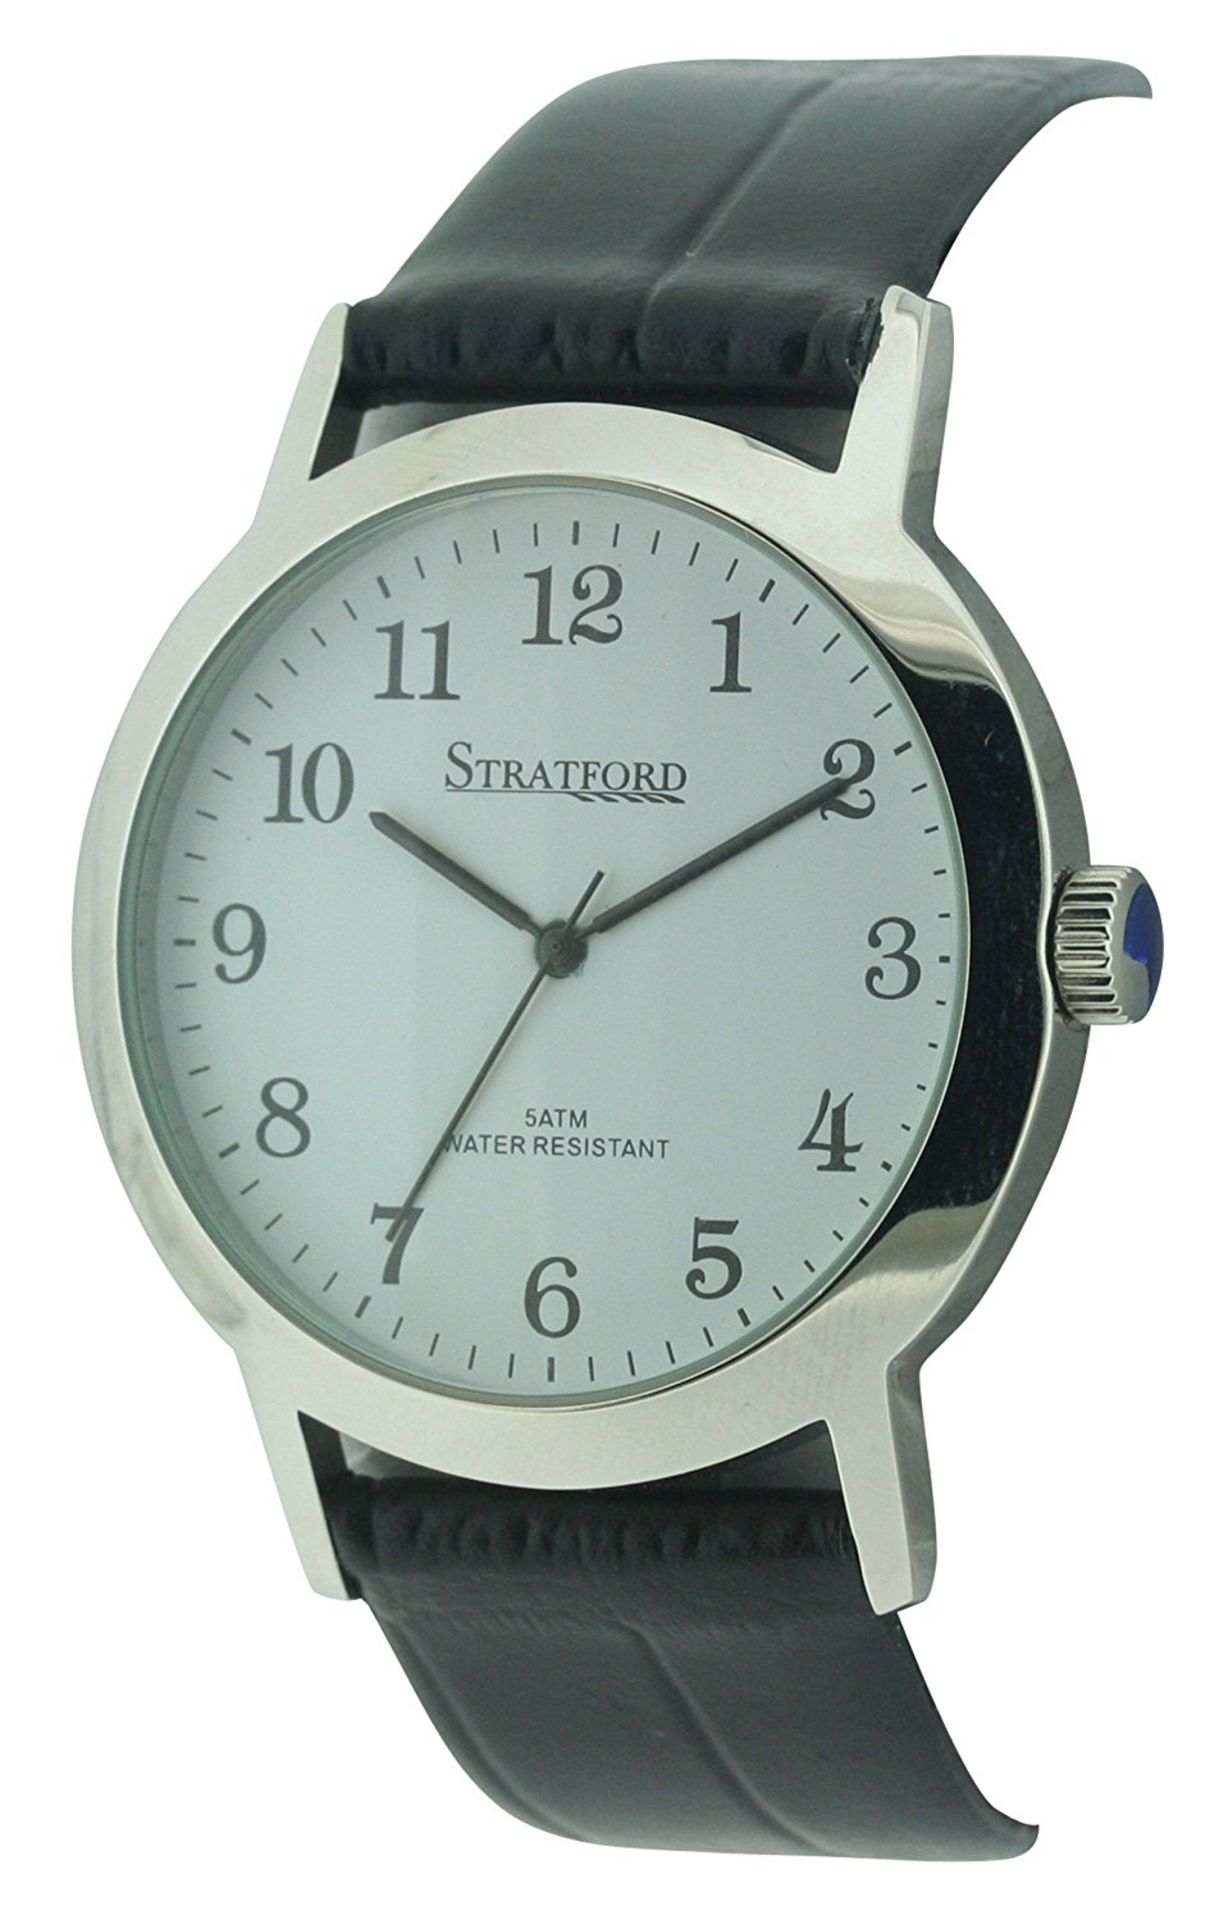 V Brand New Gents Stratford Watch with White Metal Case and Faux Leather Strap - Image is Similar